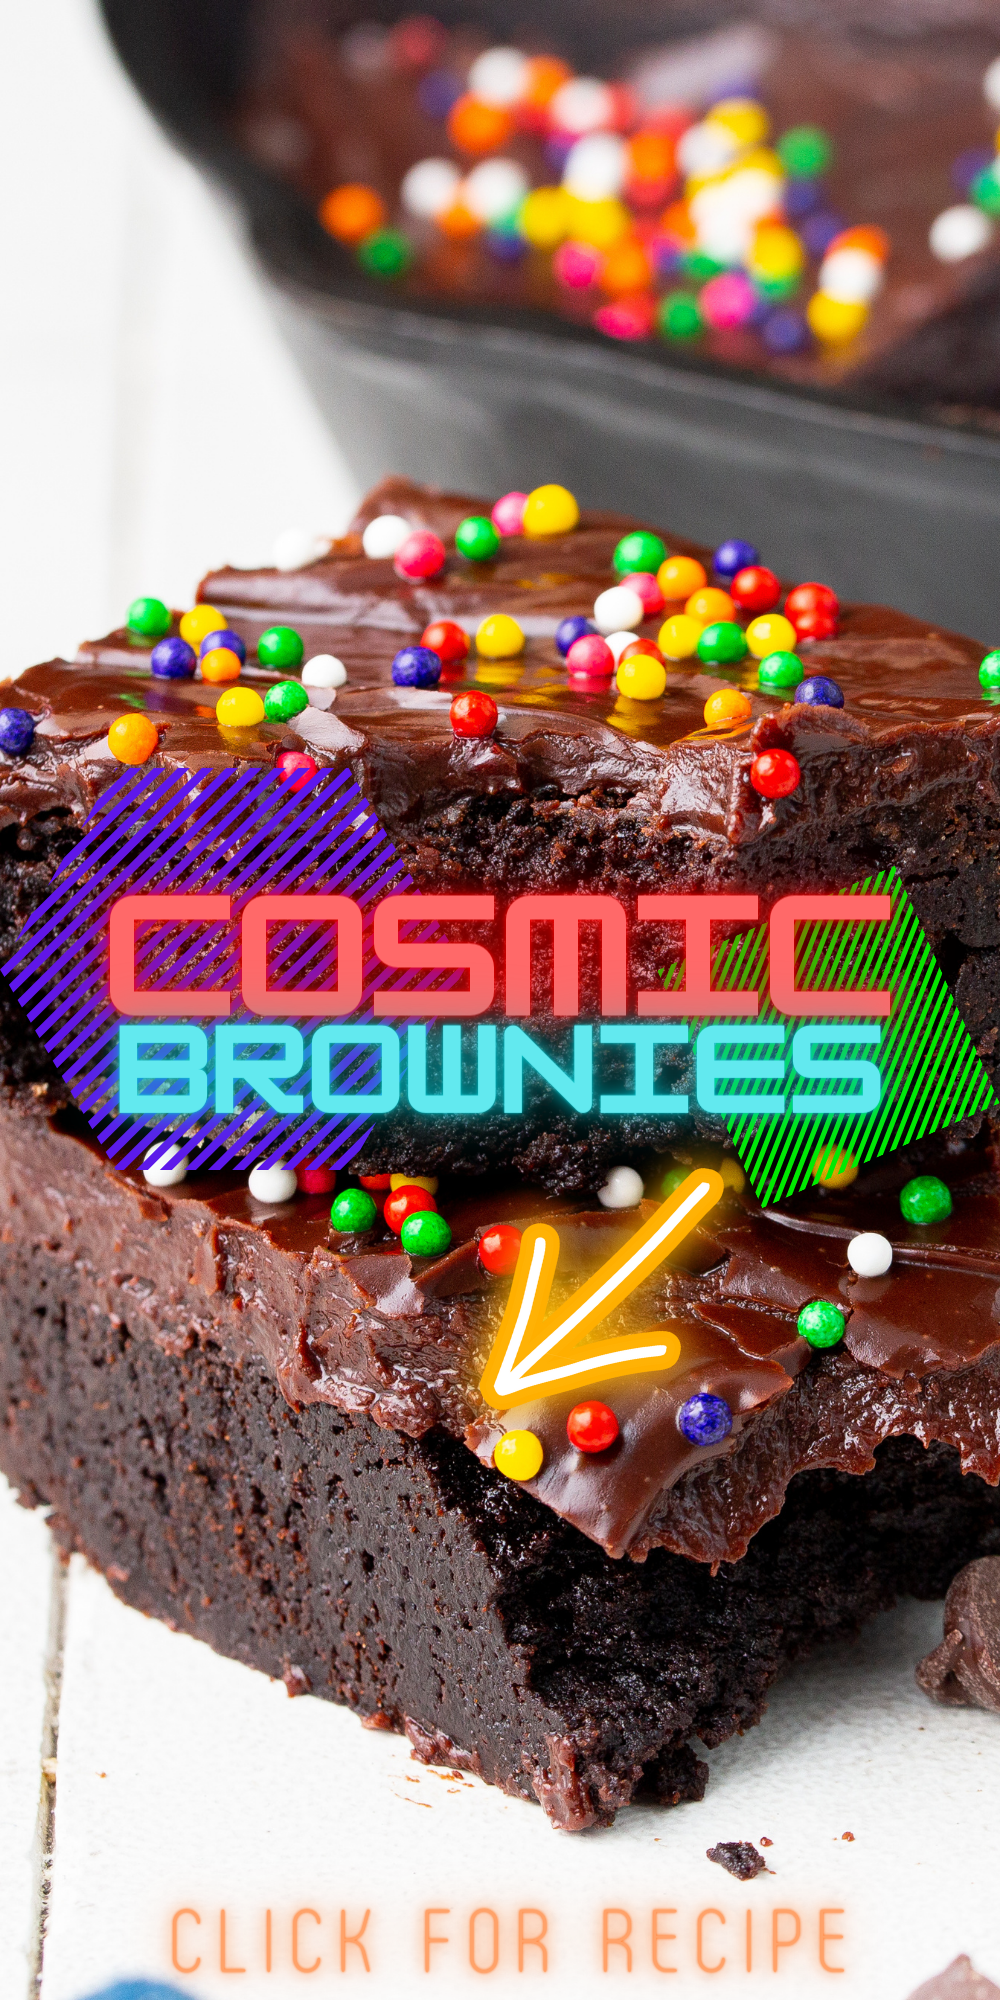 These Little Debbie's Copycat Cosmic Brownies are thick, chewy, fudgy, chocolate squares of goodness! Baked in a cast iron skillet these brownies are bound to bring out the kid in everyone!